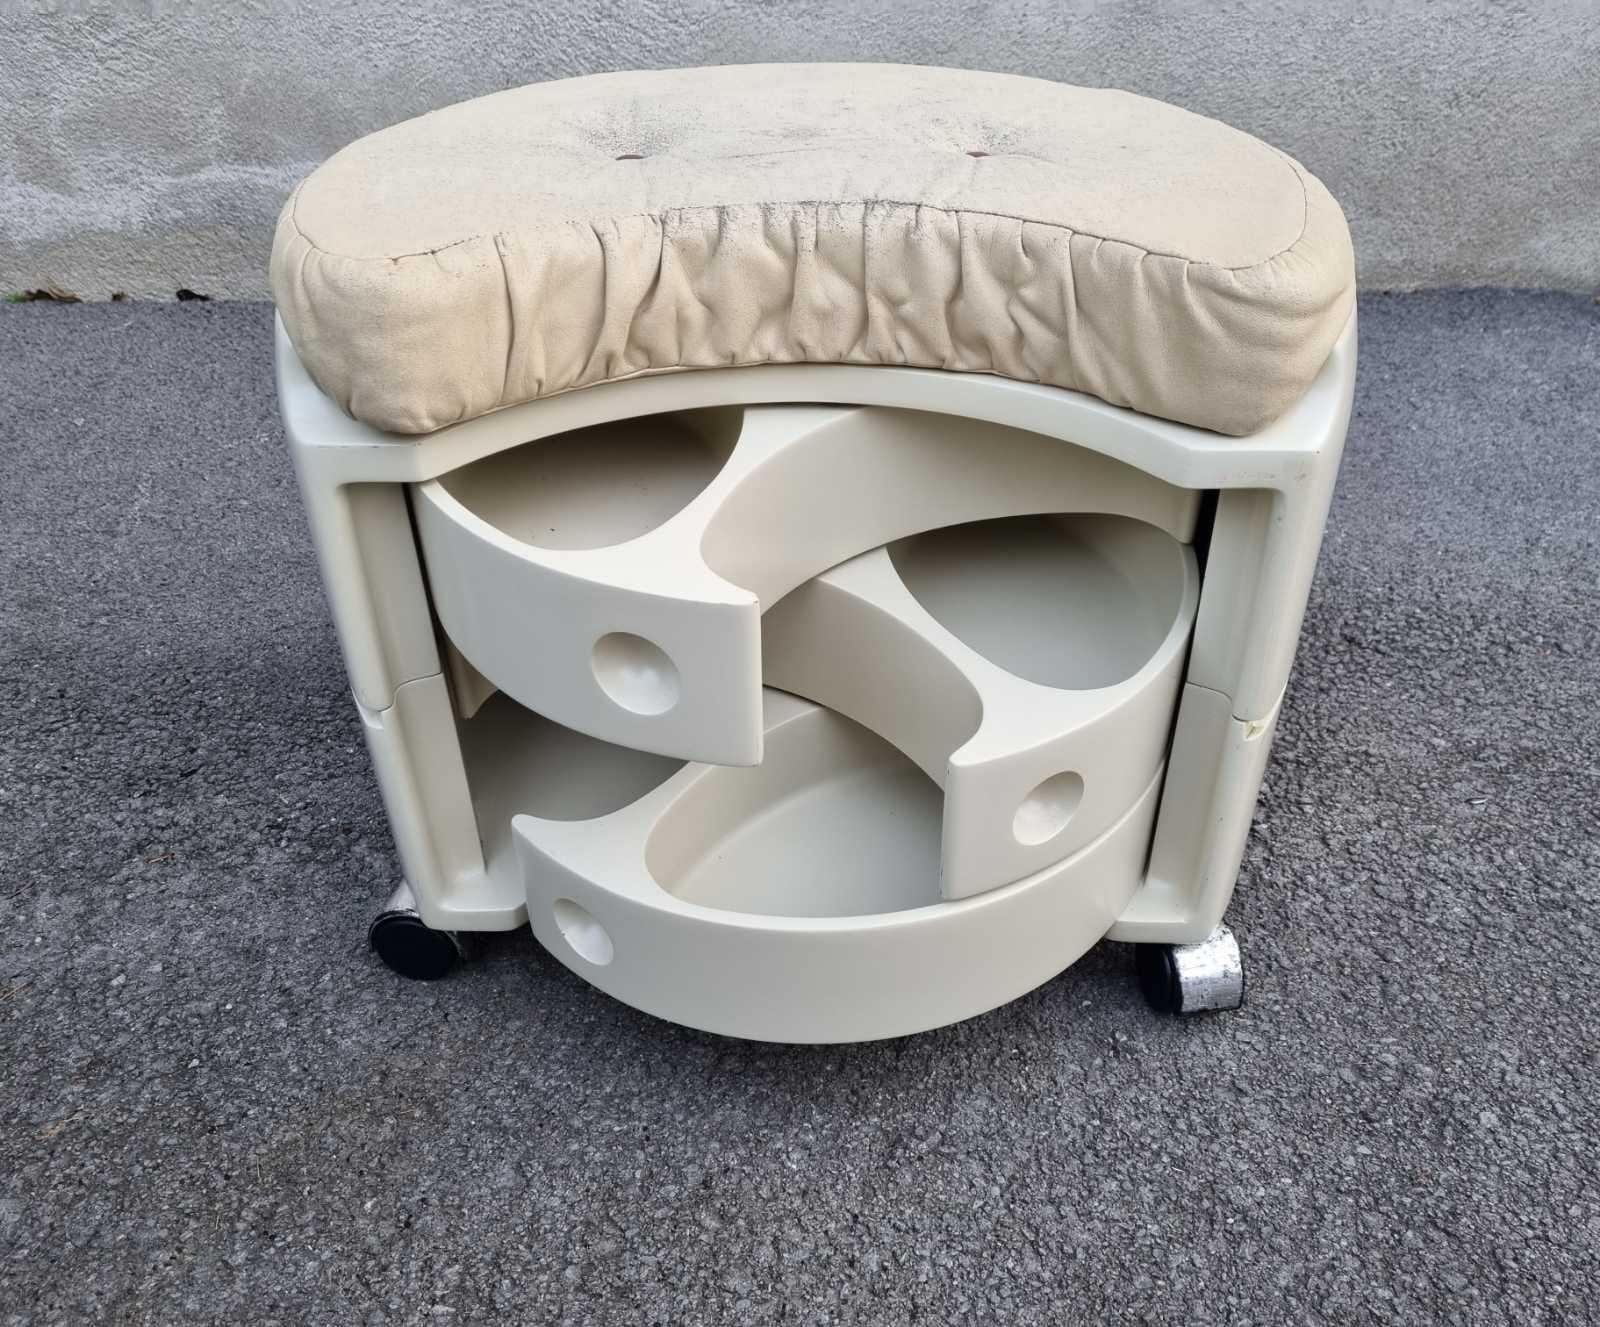 White Petineuse Stool, with lacquered drawers, was made in Italy in '70s.
It is made of wooden frame with drawers and leather seat.
This gorgeous piece makes a perfect addition to your home. Very retro, space age piece, that is suitable for your